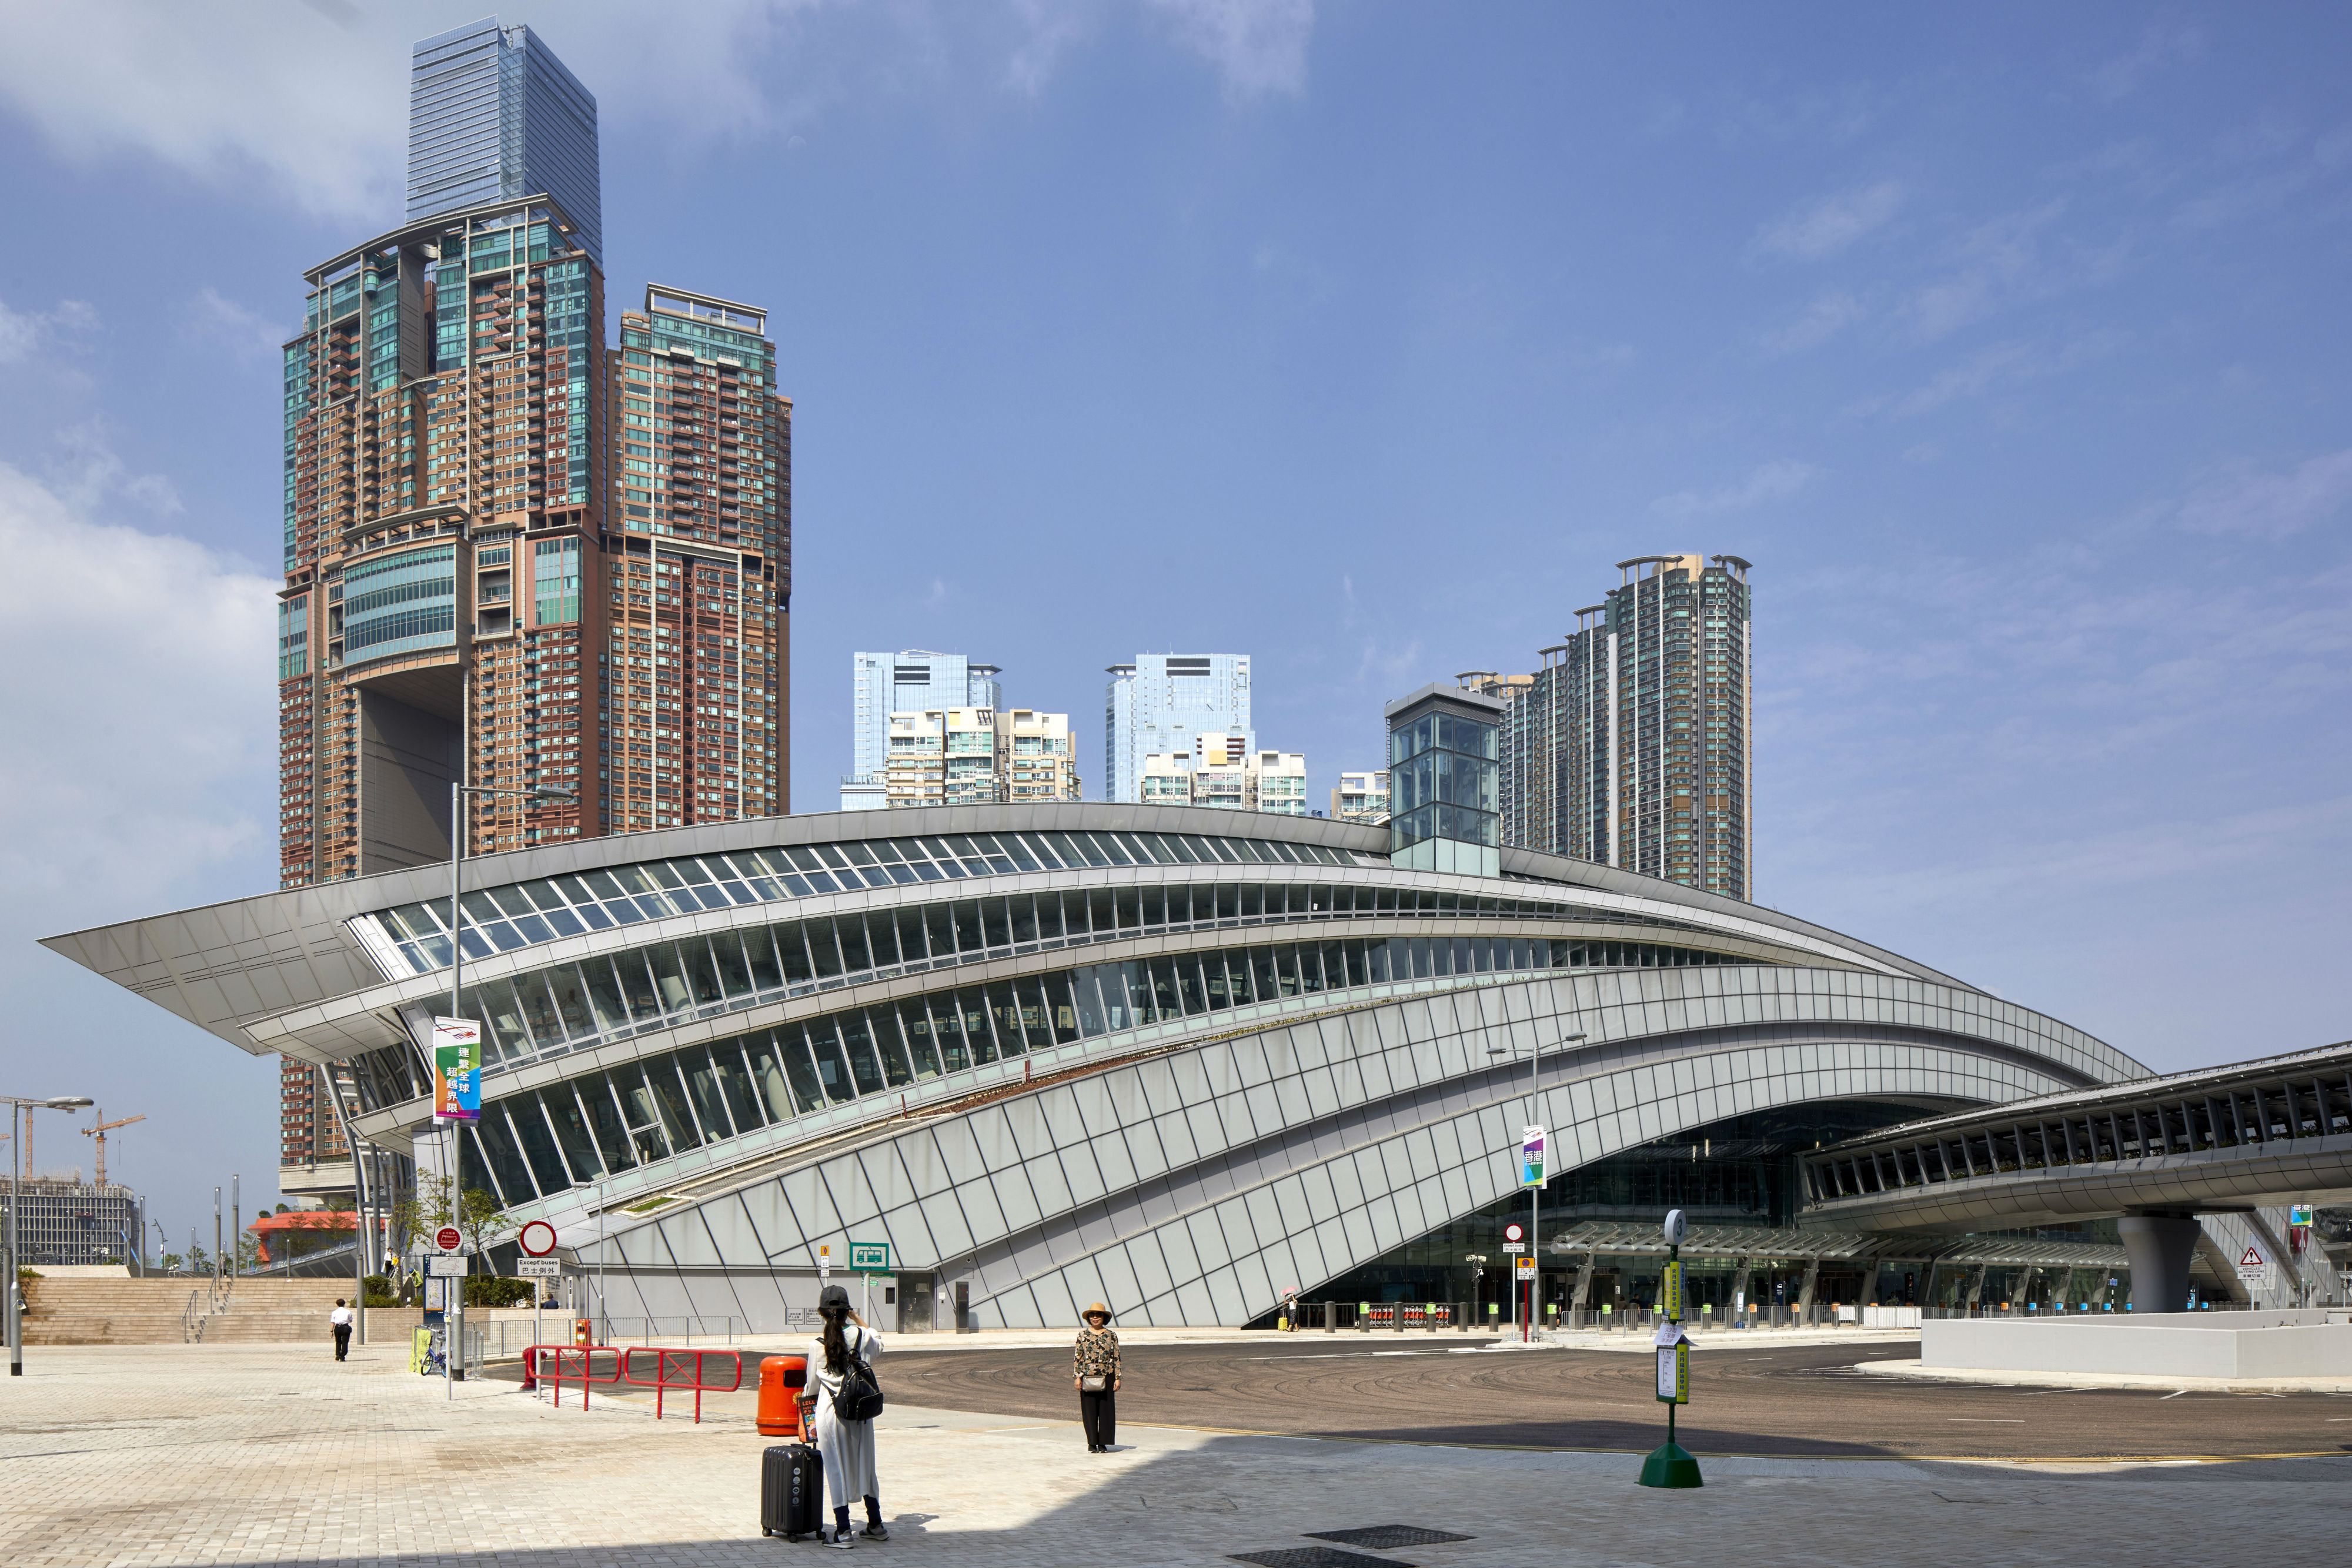 West Kowloon Station is a vibrant new arrival in Hong Kong